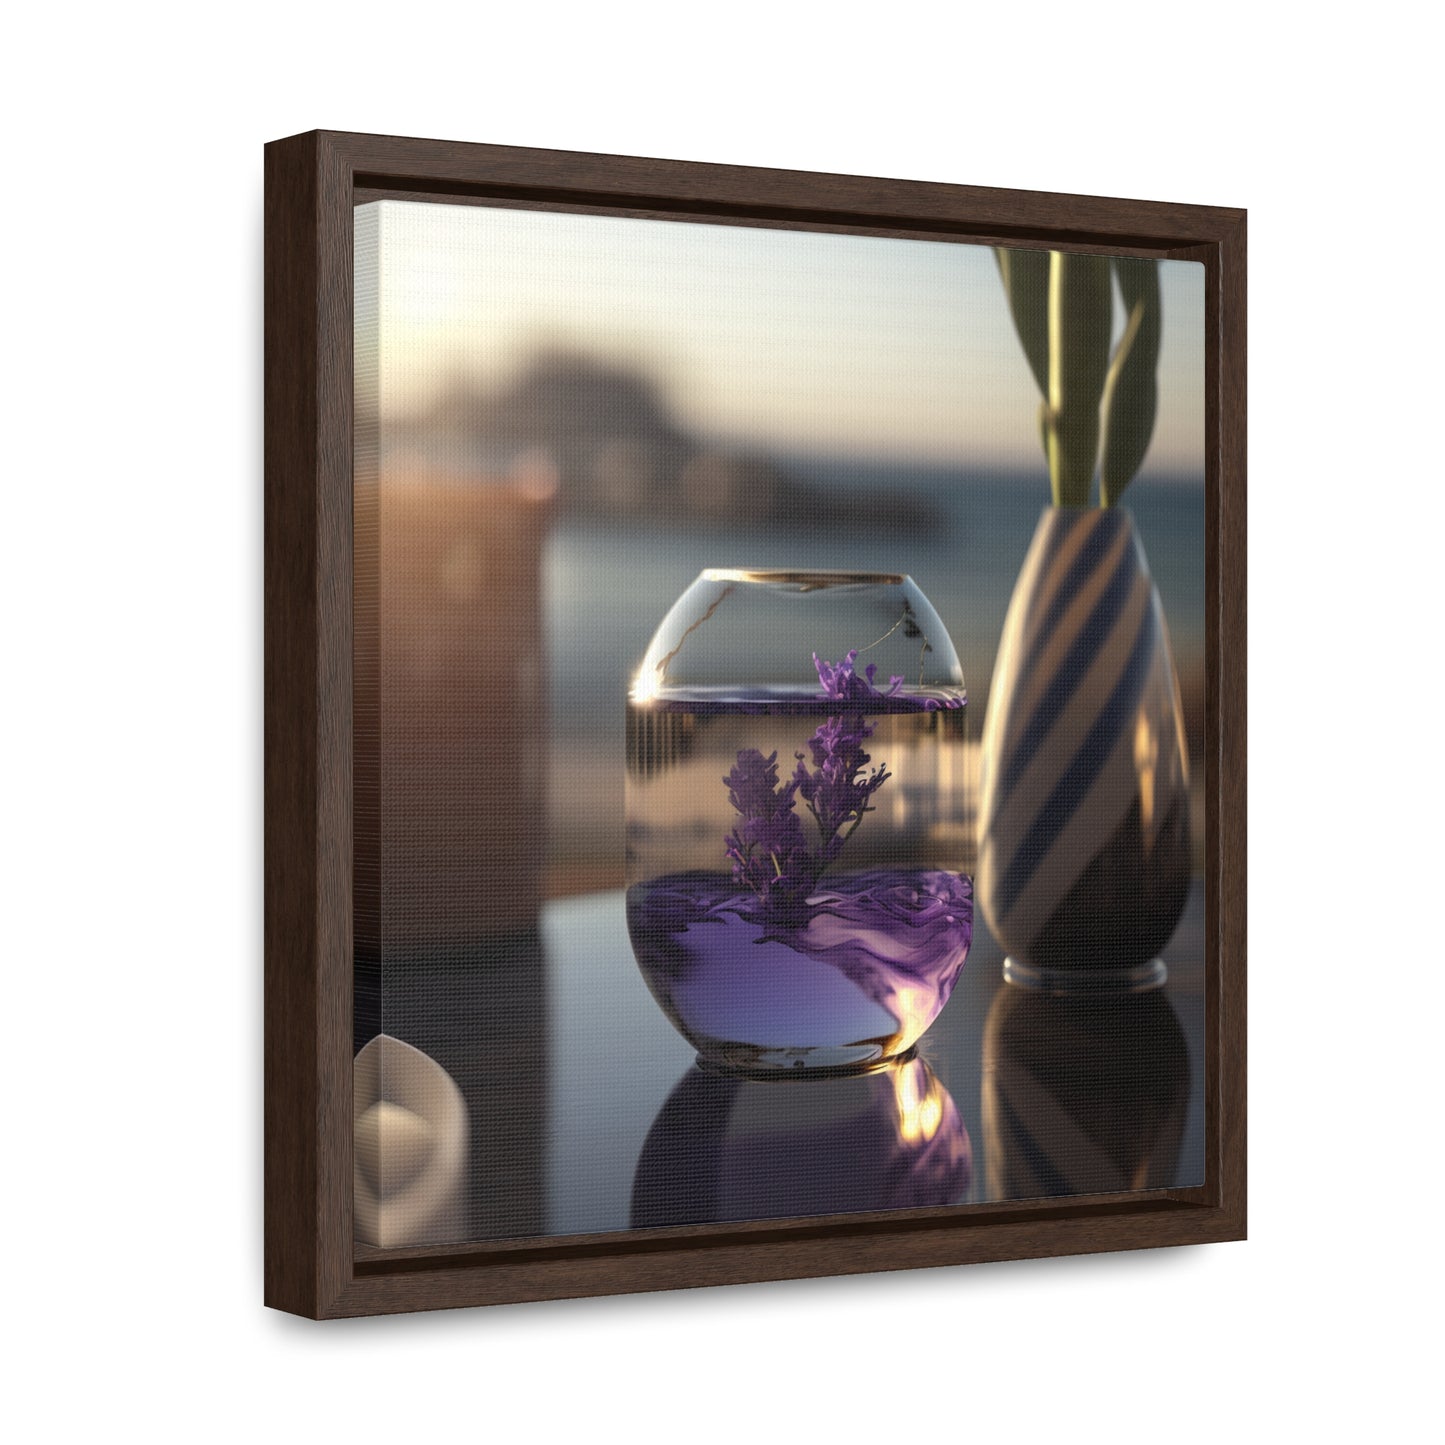 Gallery Canvas Wraps, Square Frame Lavender in a vase 1